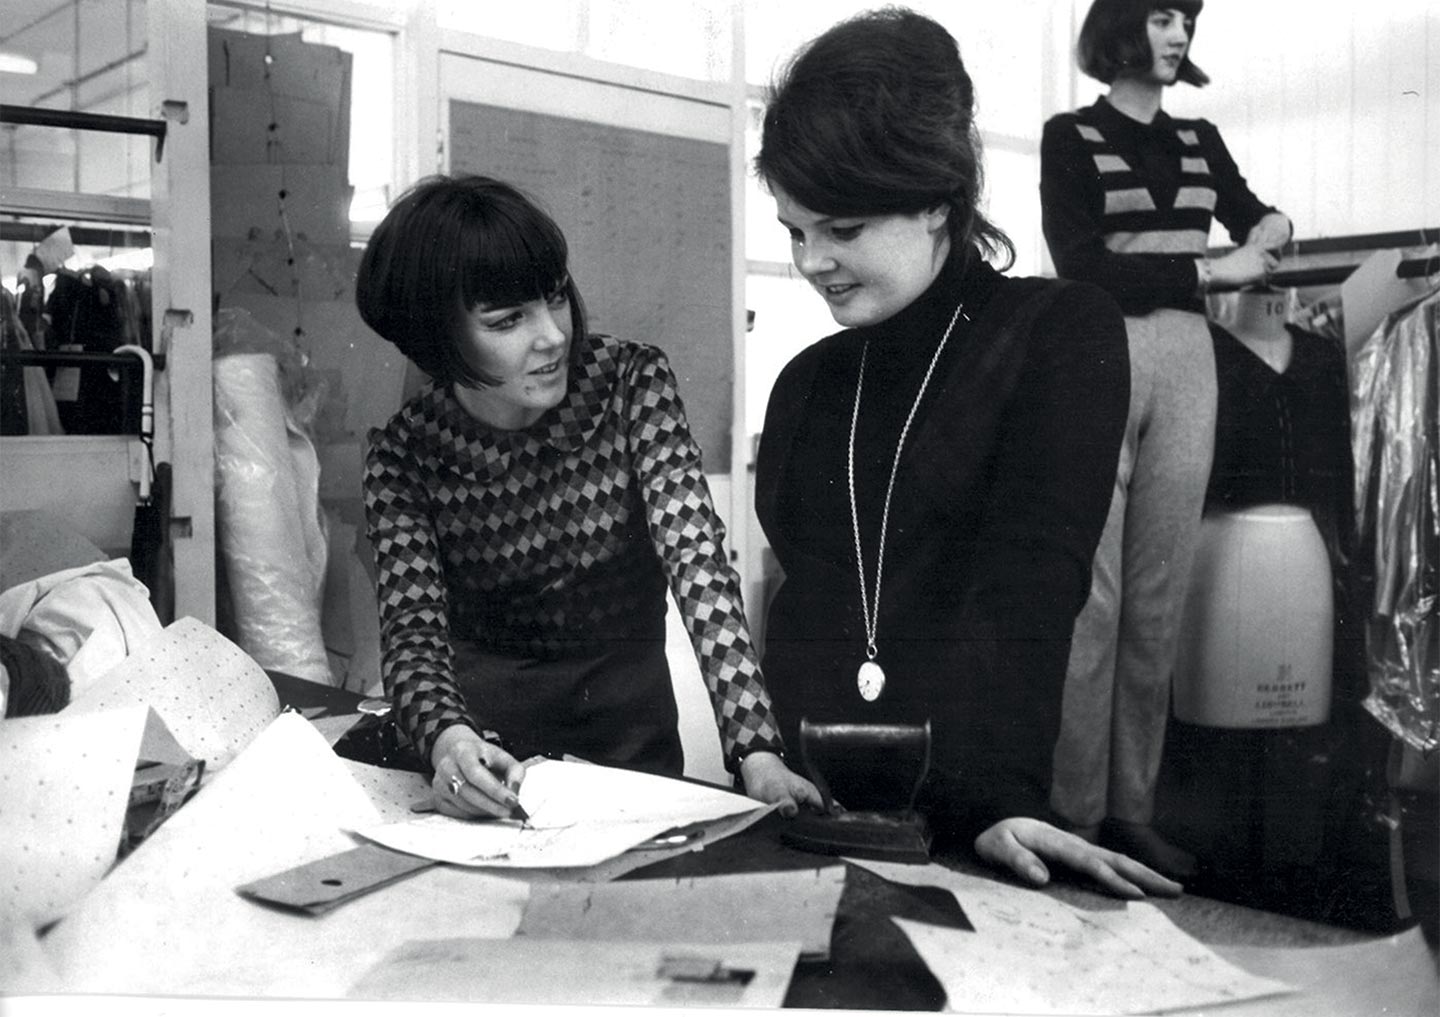 Quant (left) in the workroom 1963. Image courtesy of Mary Quant Archive / Victoria and Albert Museum © George Konig